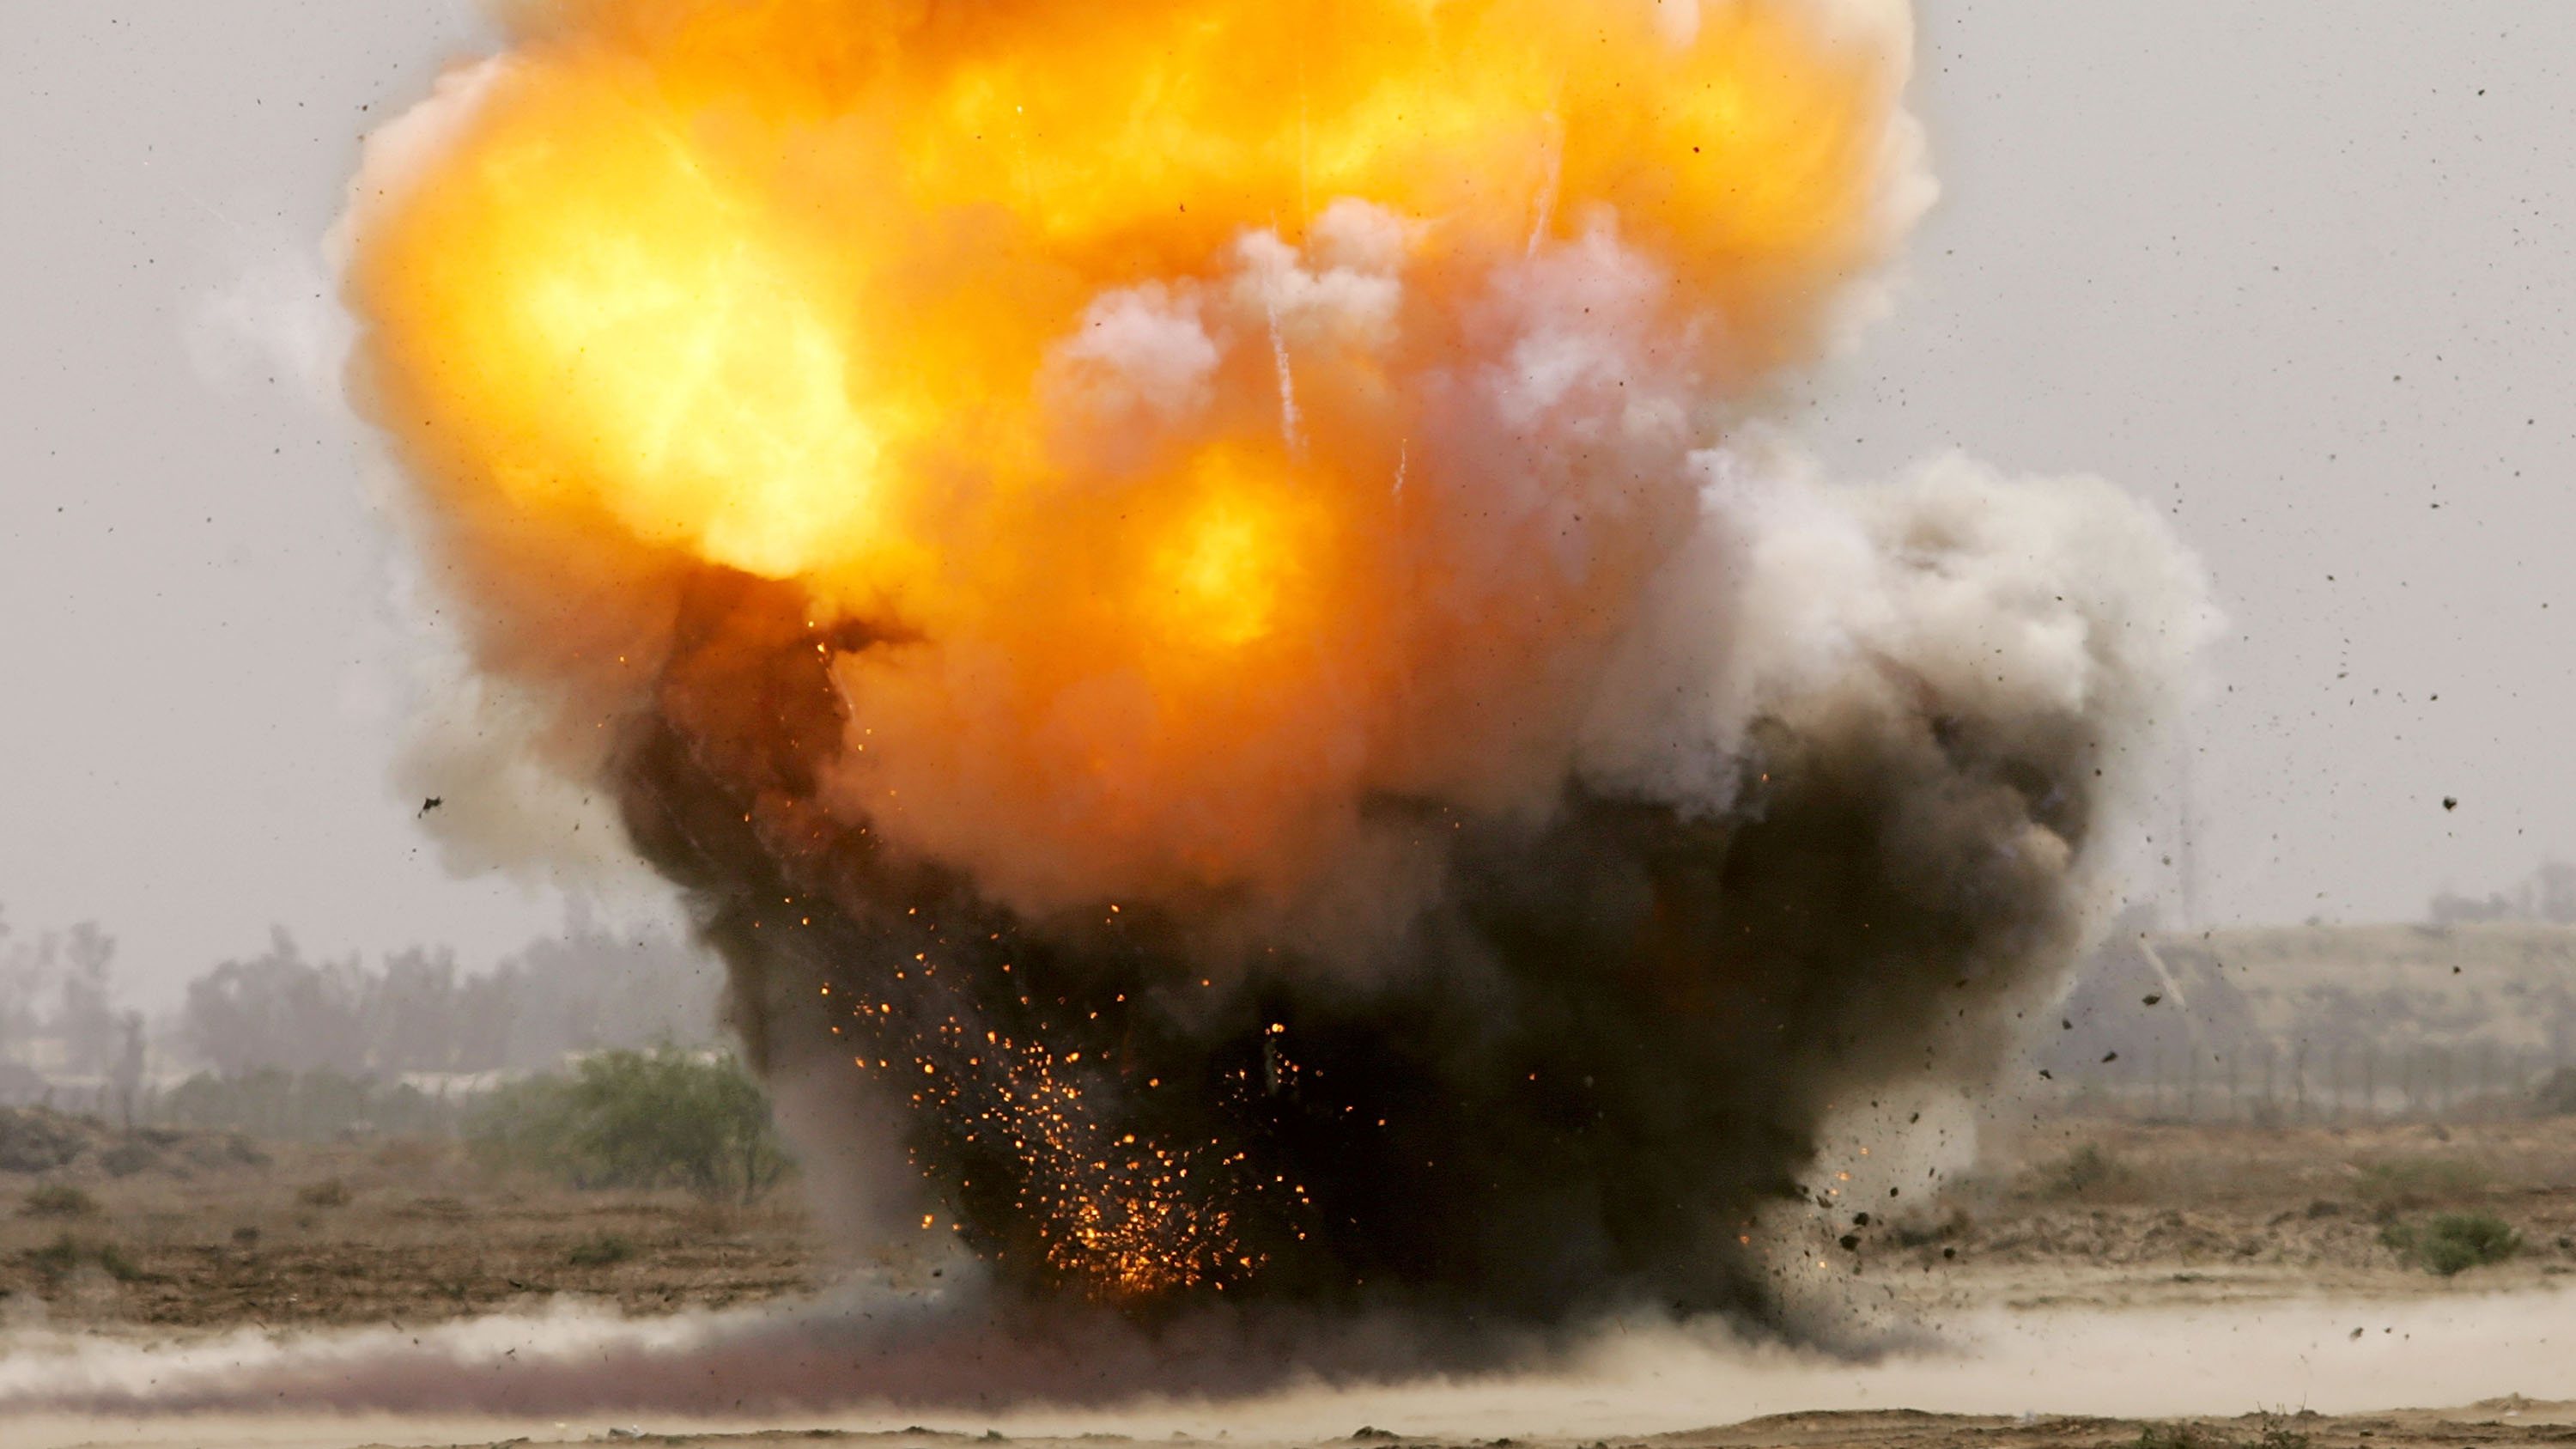 Army Explosives Team Destroys Roadside Bombs In Iraq